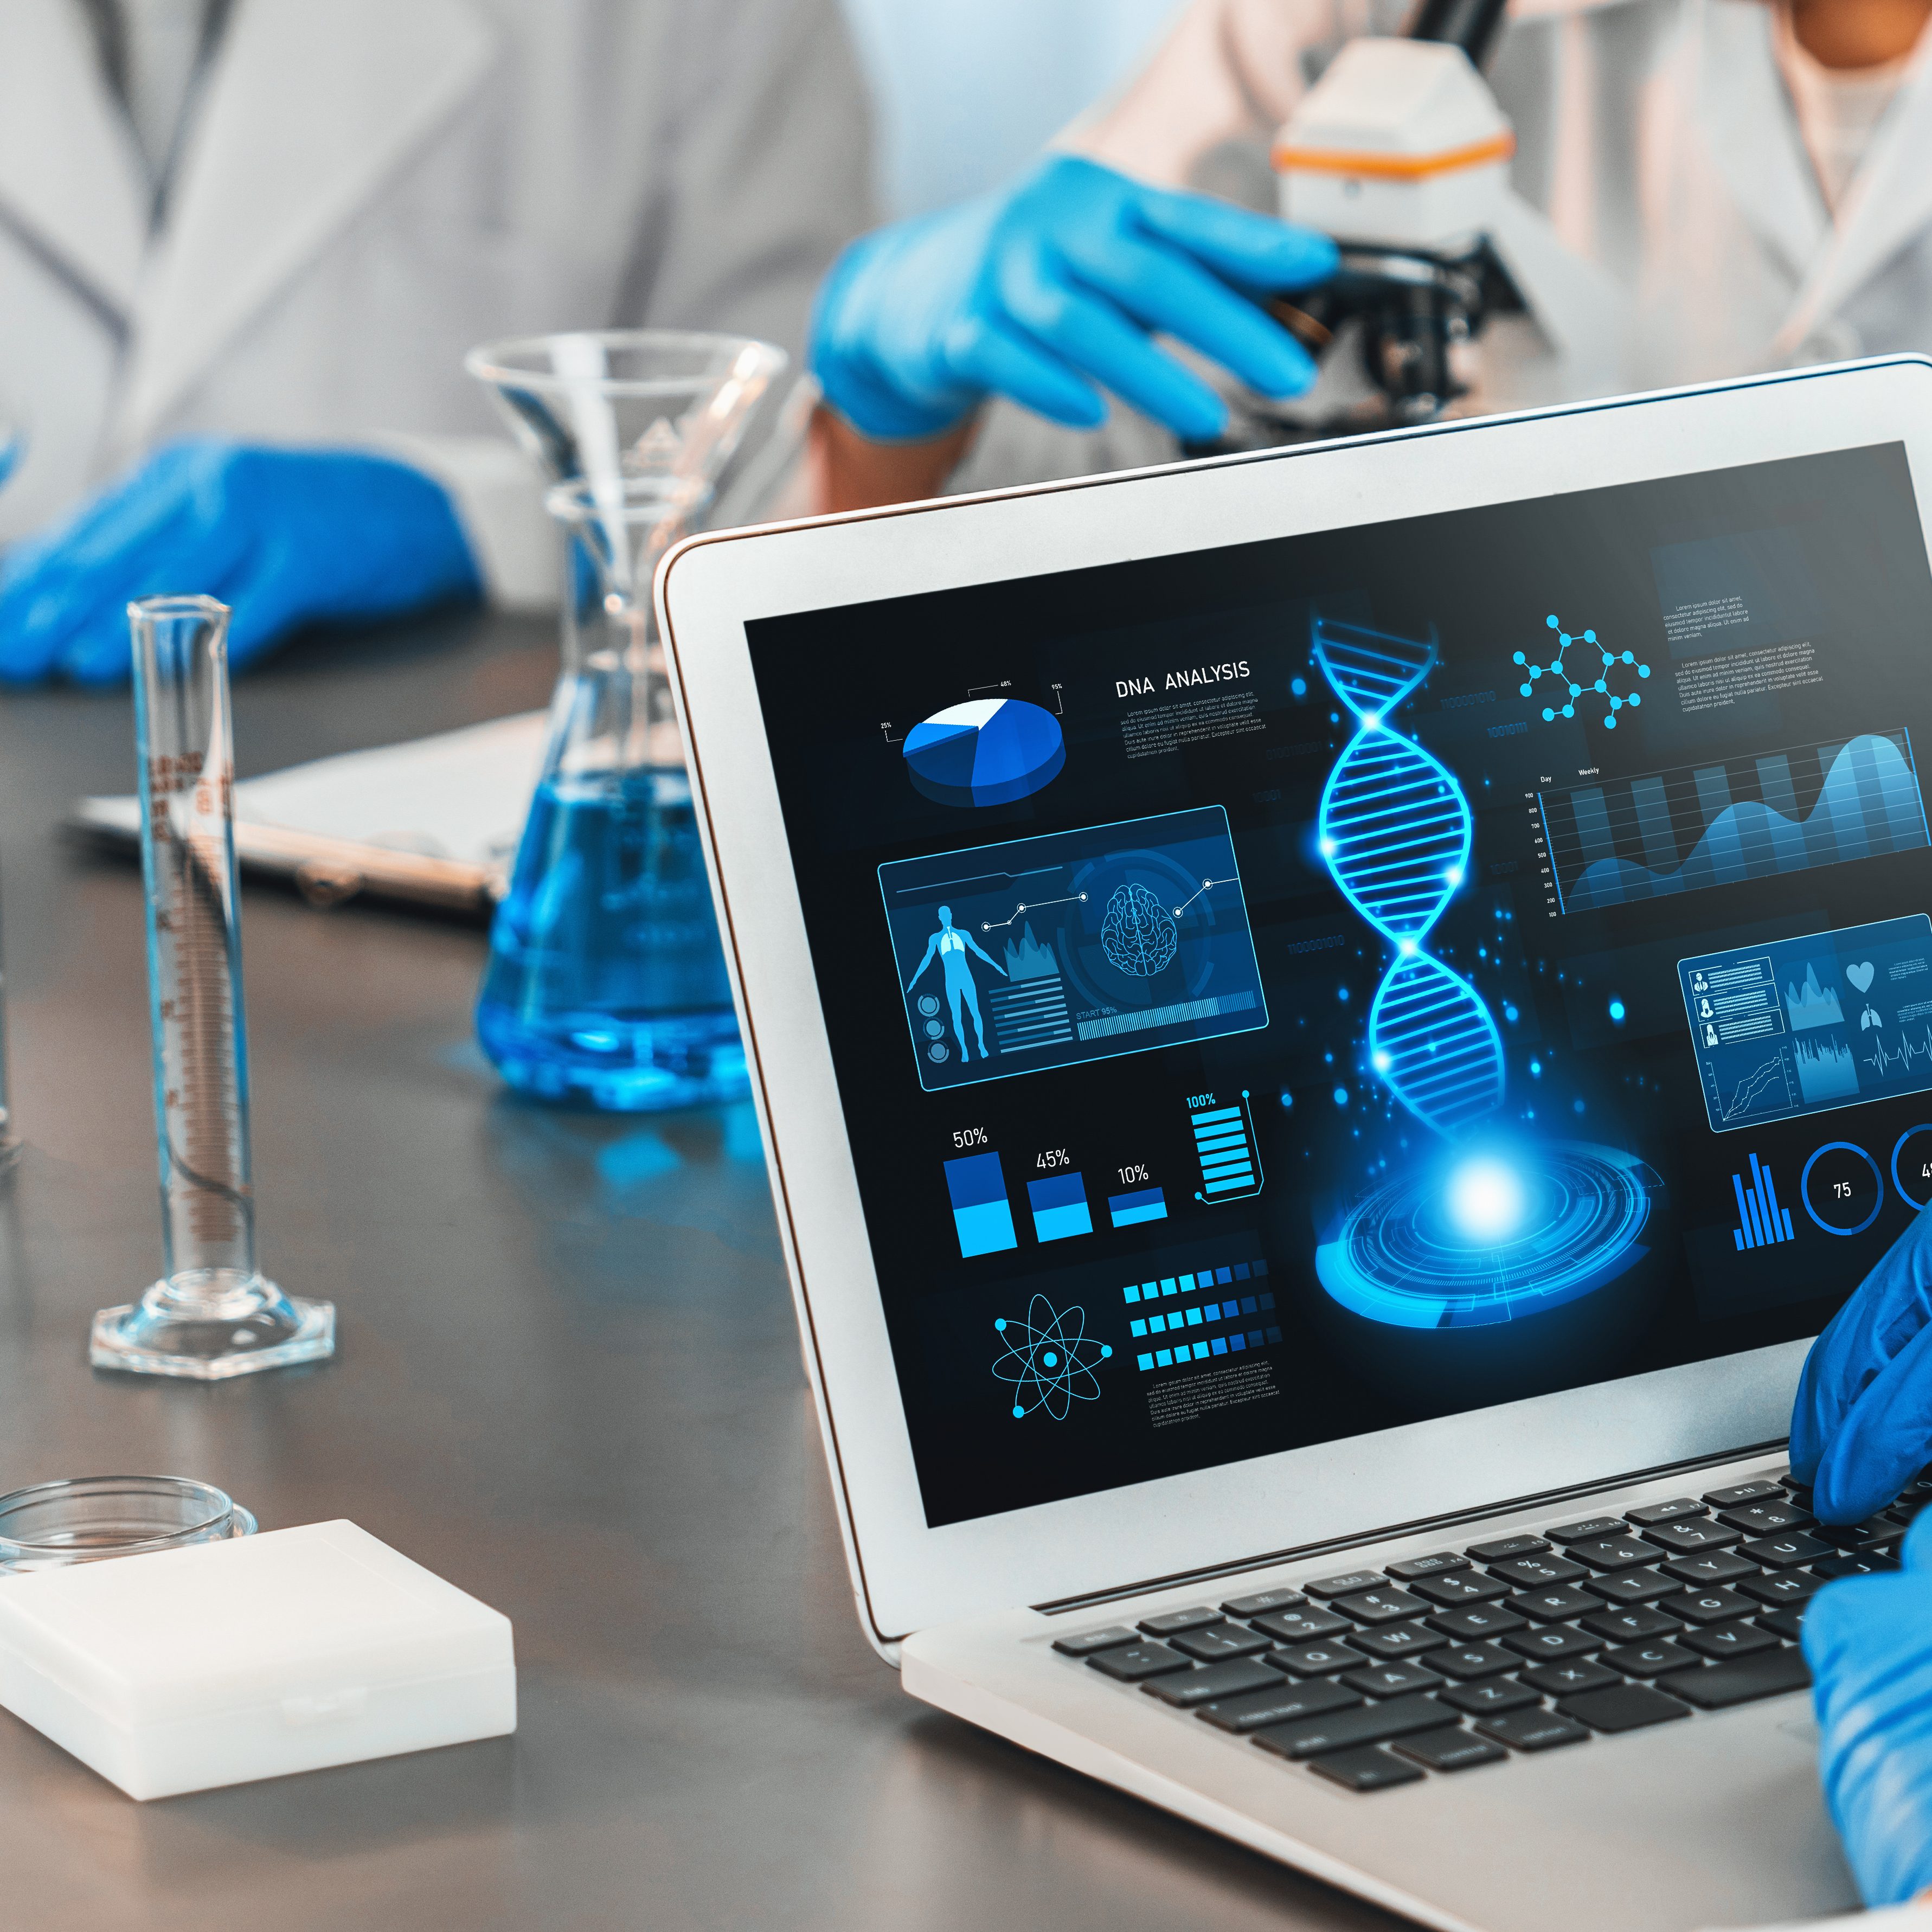 Dedicated scientist group working on advance biotechnology computer software to study or analyze DNA data after making scientific breakthrough from chemical experiment on medical laboratory. Neoteric